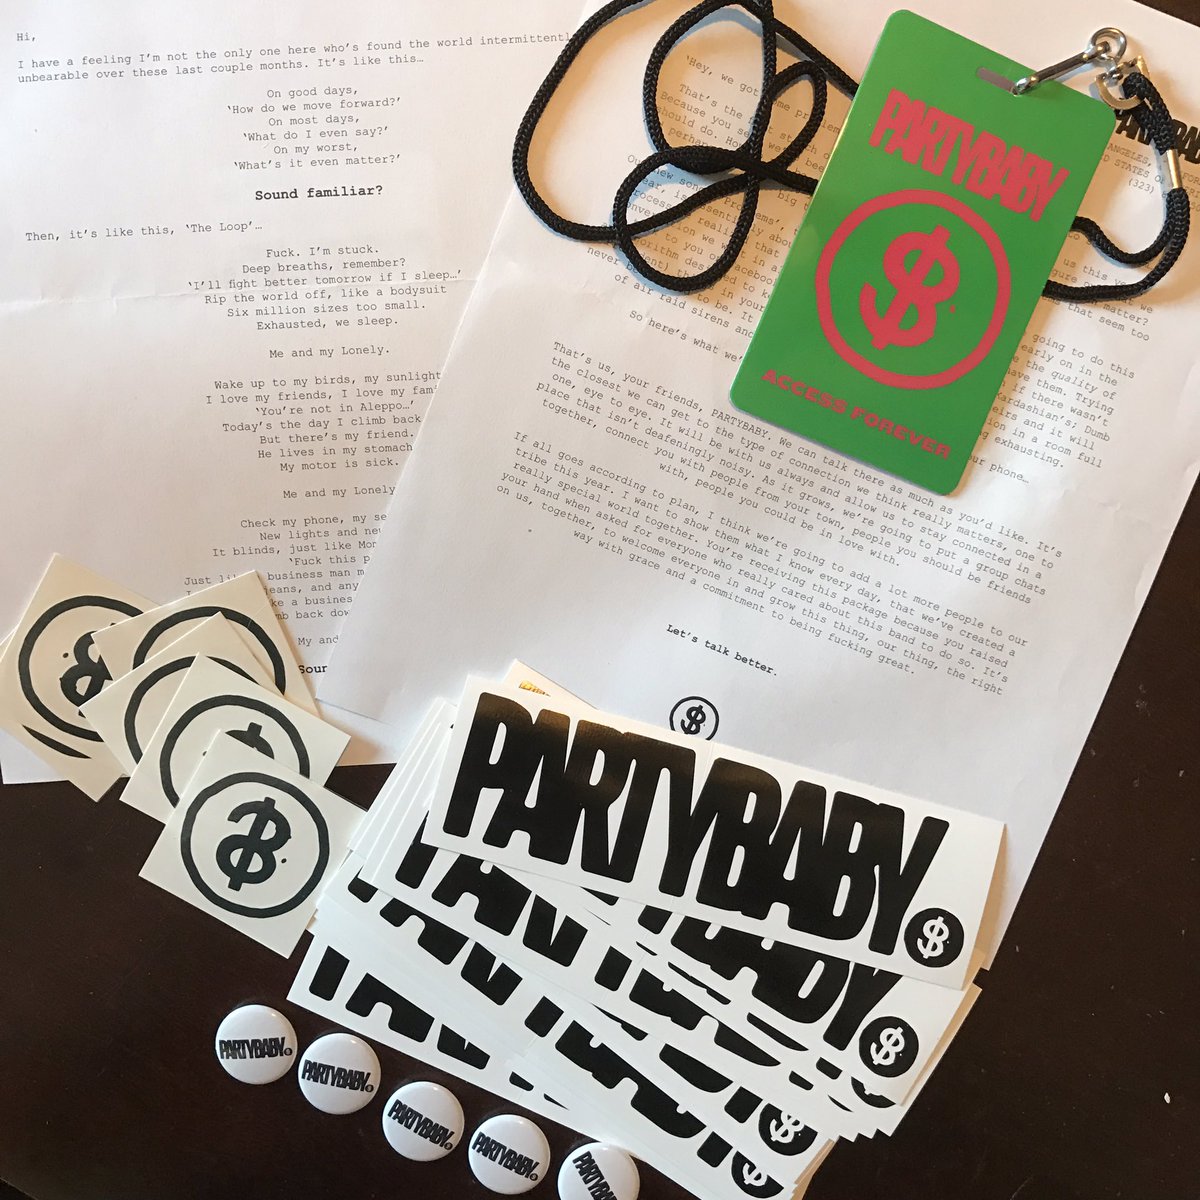 Just got the most amazing package from @partybabylives 🙌🏼❤🎉 #amazingmessage #musicconnects #partybaby